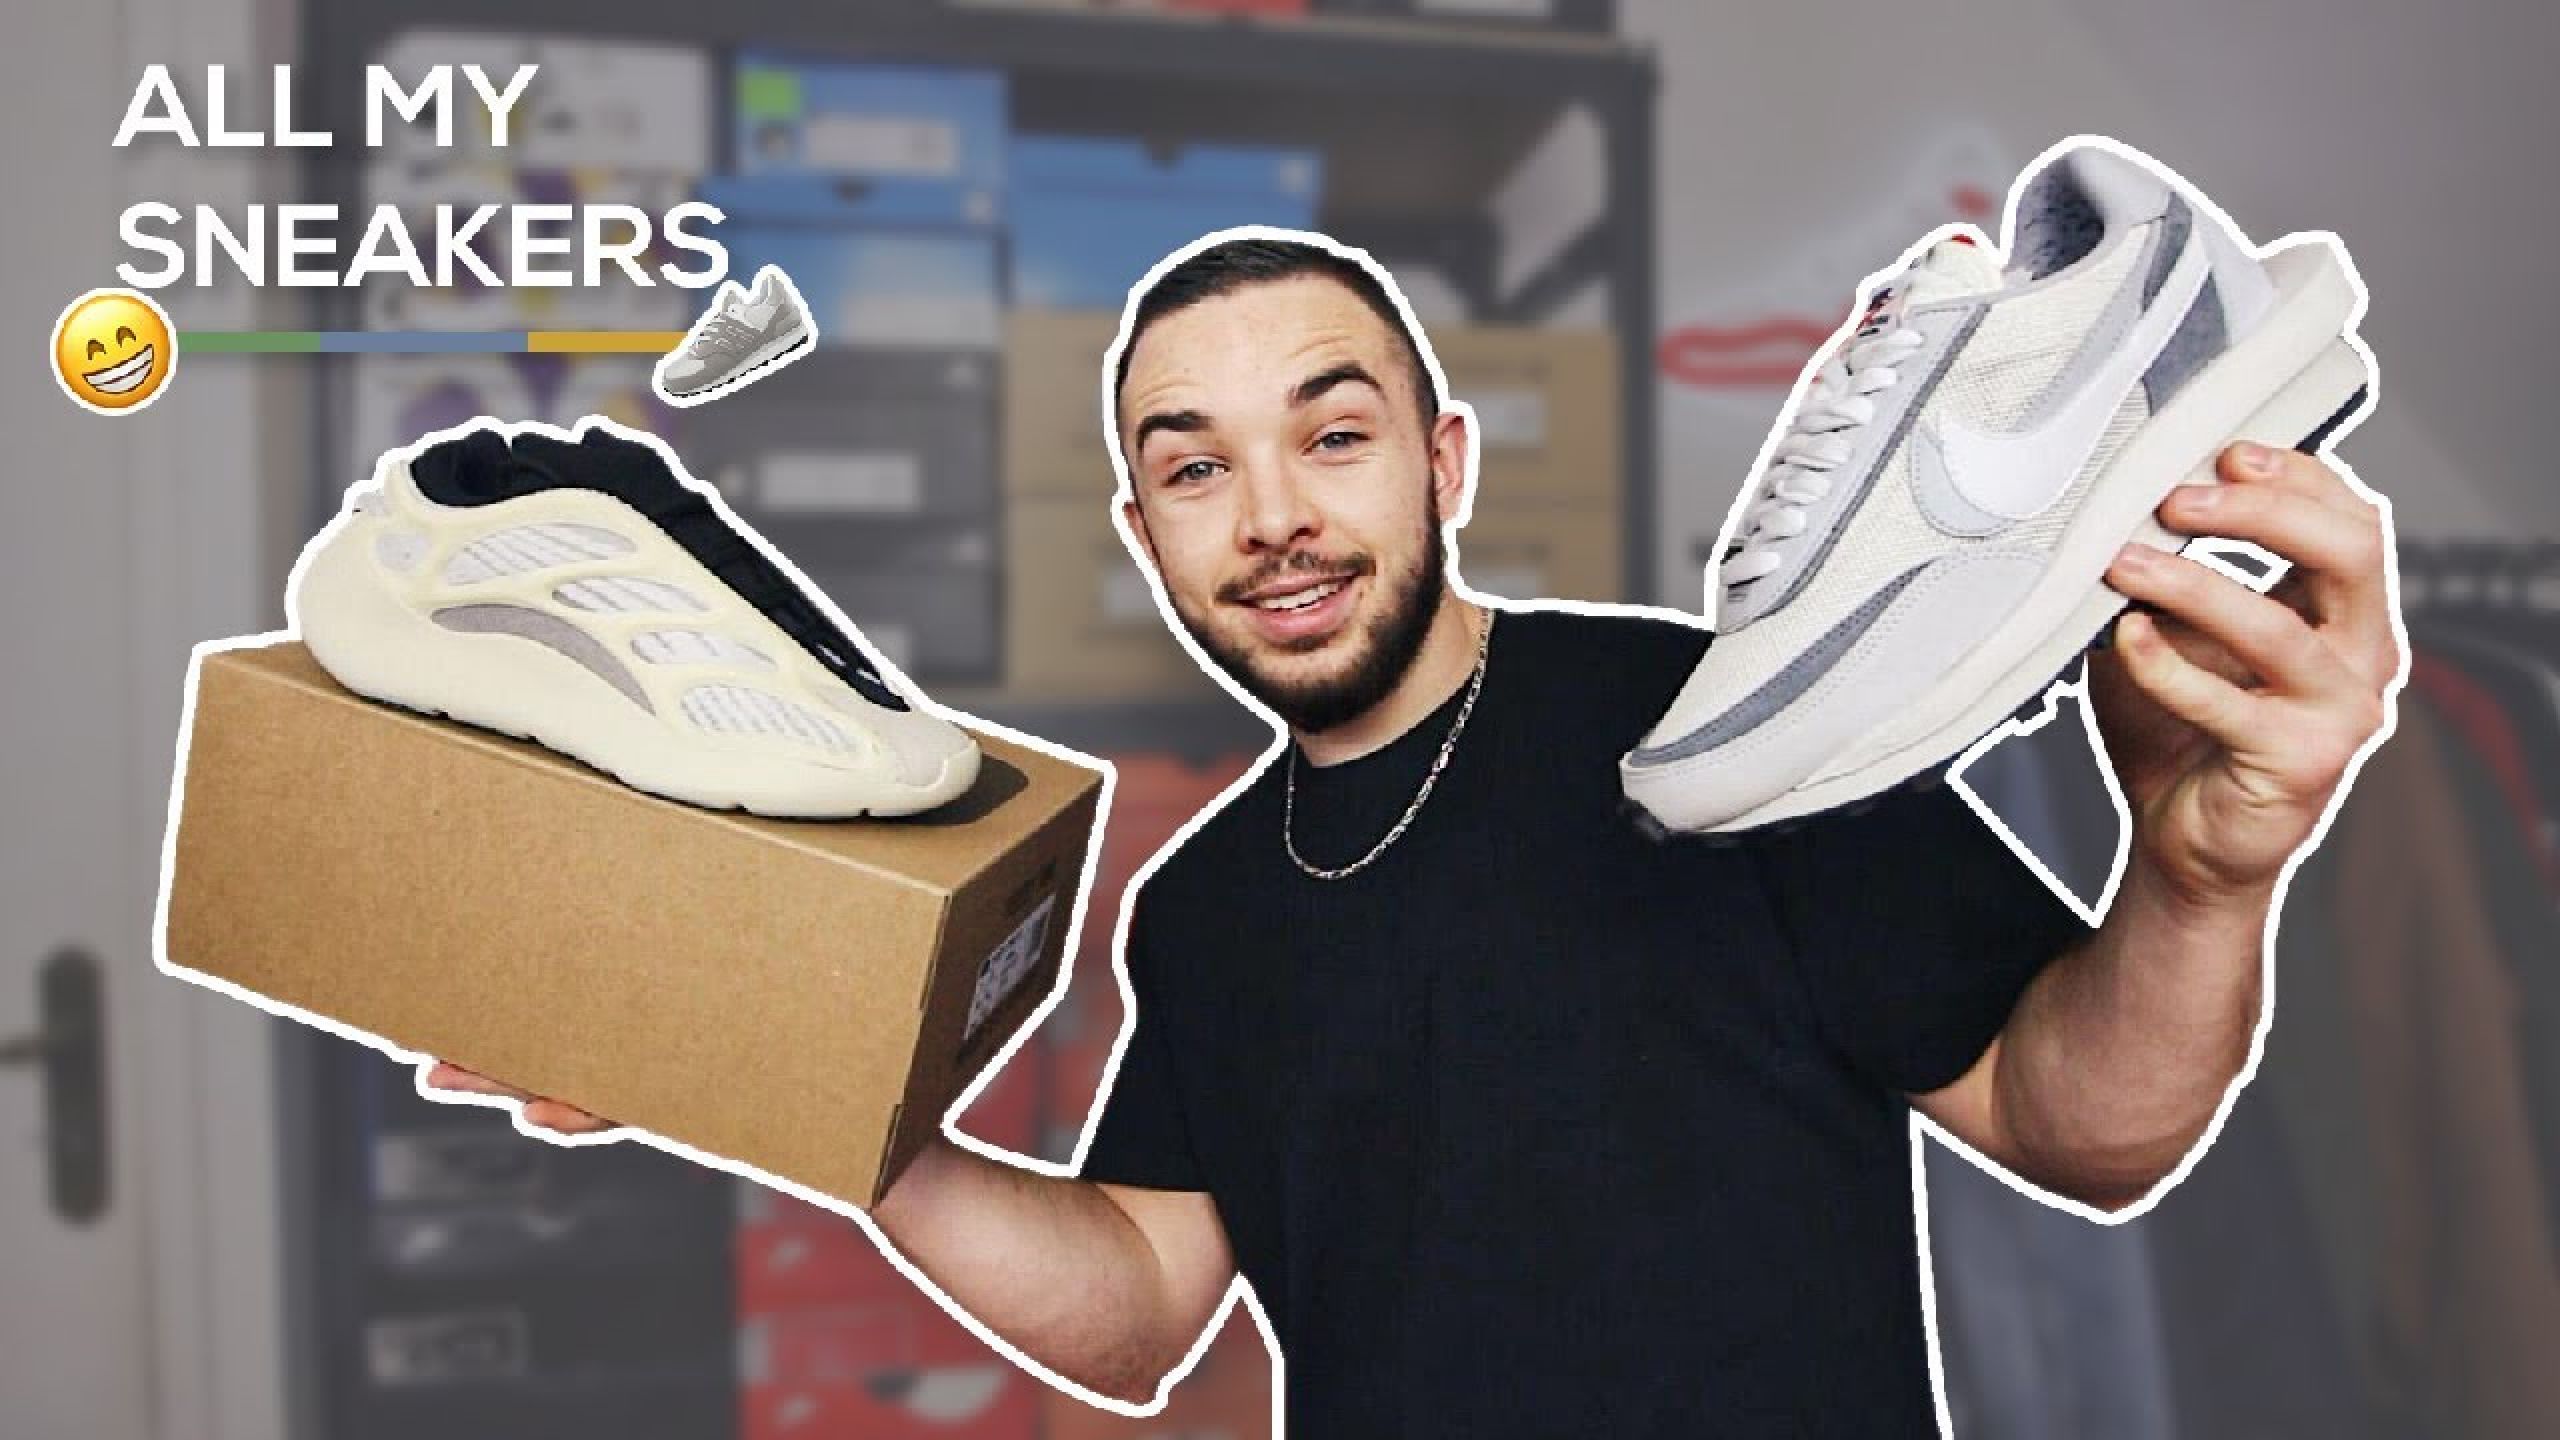 ALL MY SNEAKERS : TOUTES MES PAIRES DE BASKETS ! 👟: Clothes, Outfits ...